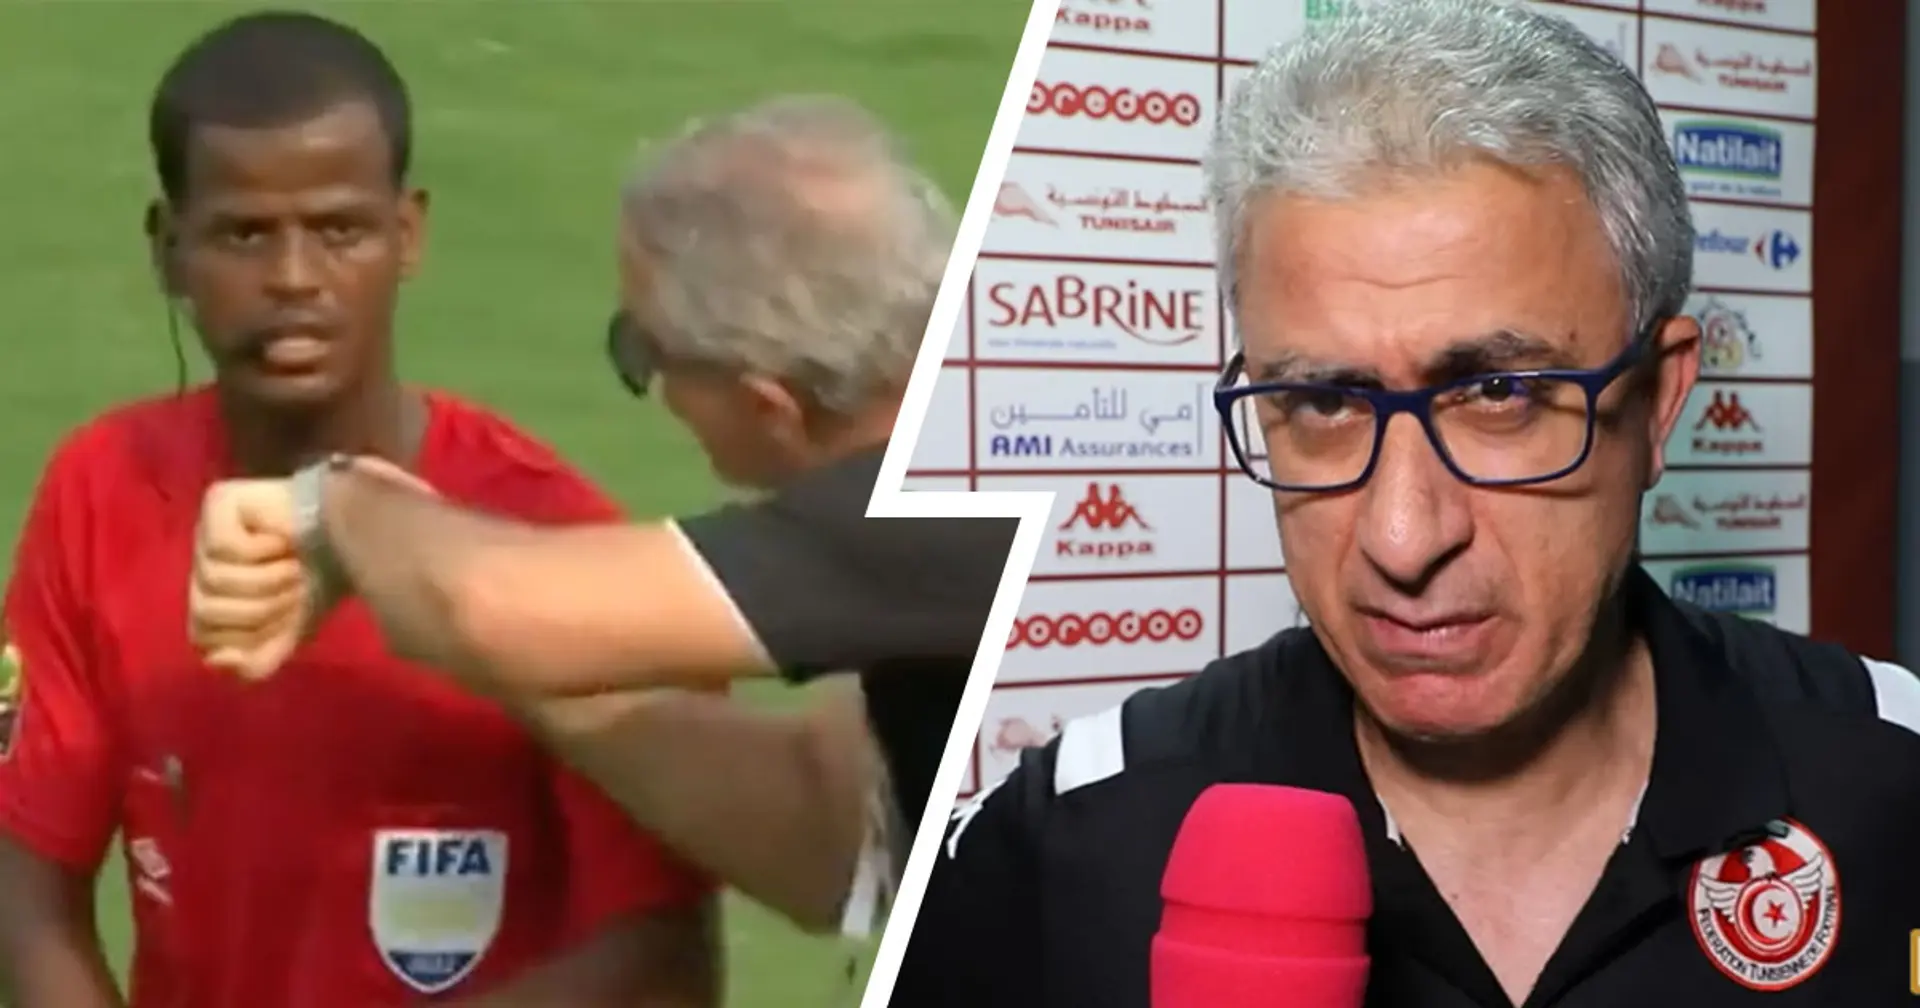 ‘The players were taking icebaths before being called back': Tunisia coach Kebaier reacts to bizarre refereeing in Mali loss